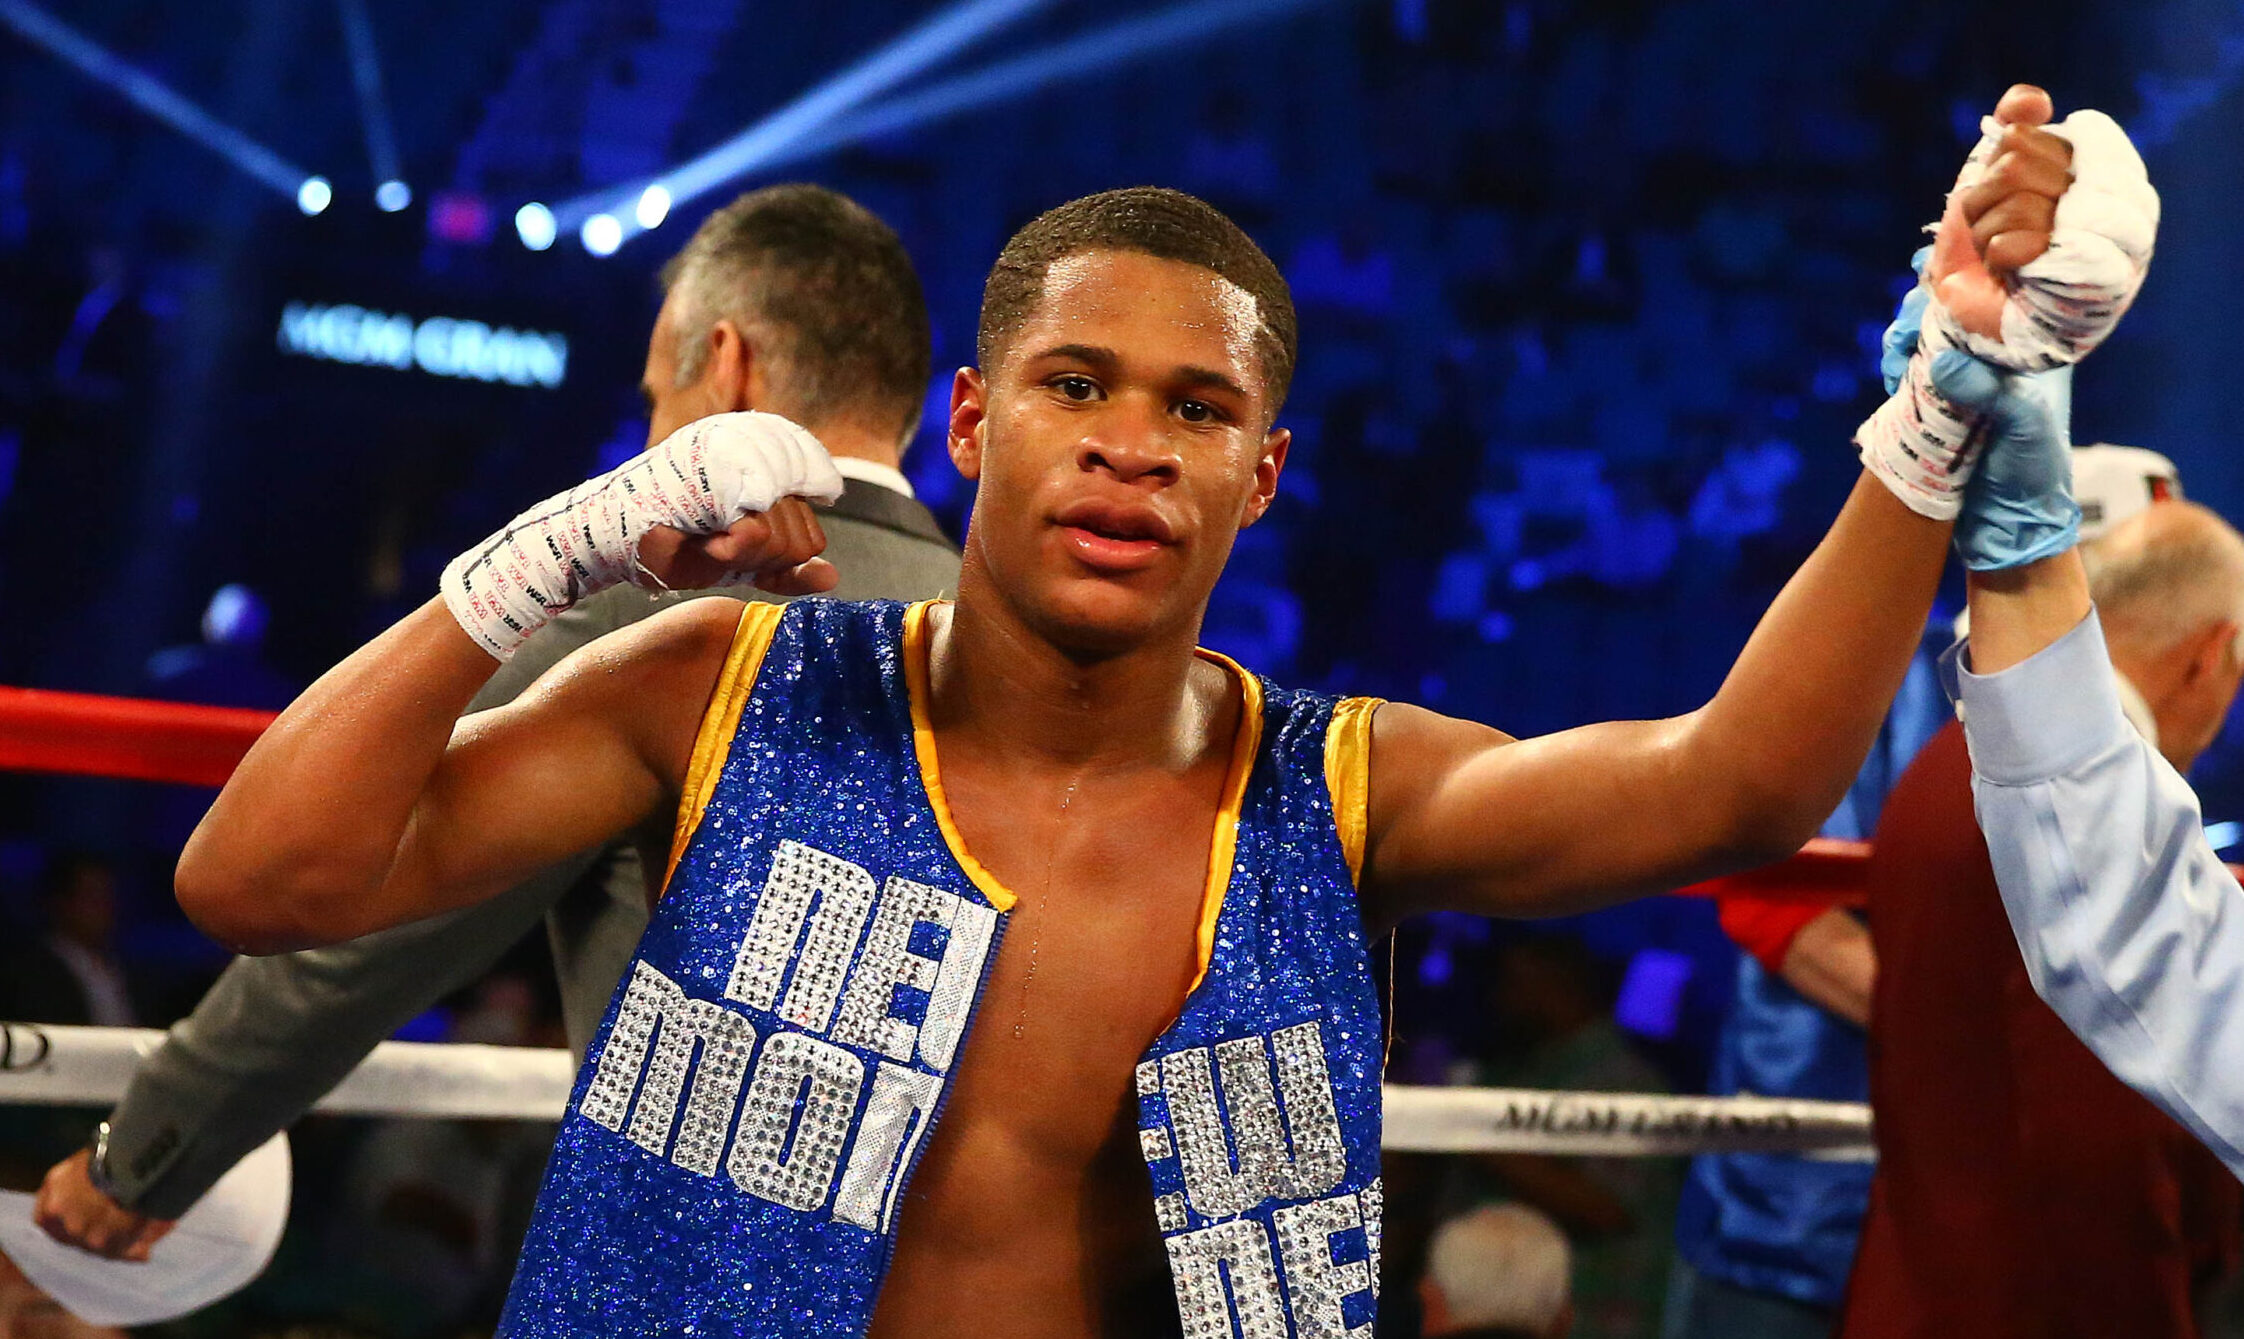 Devin Haney Next Fight 'The Dream' Returns to Defend His Belt in April